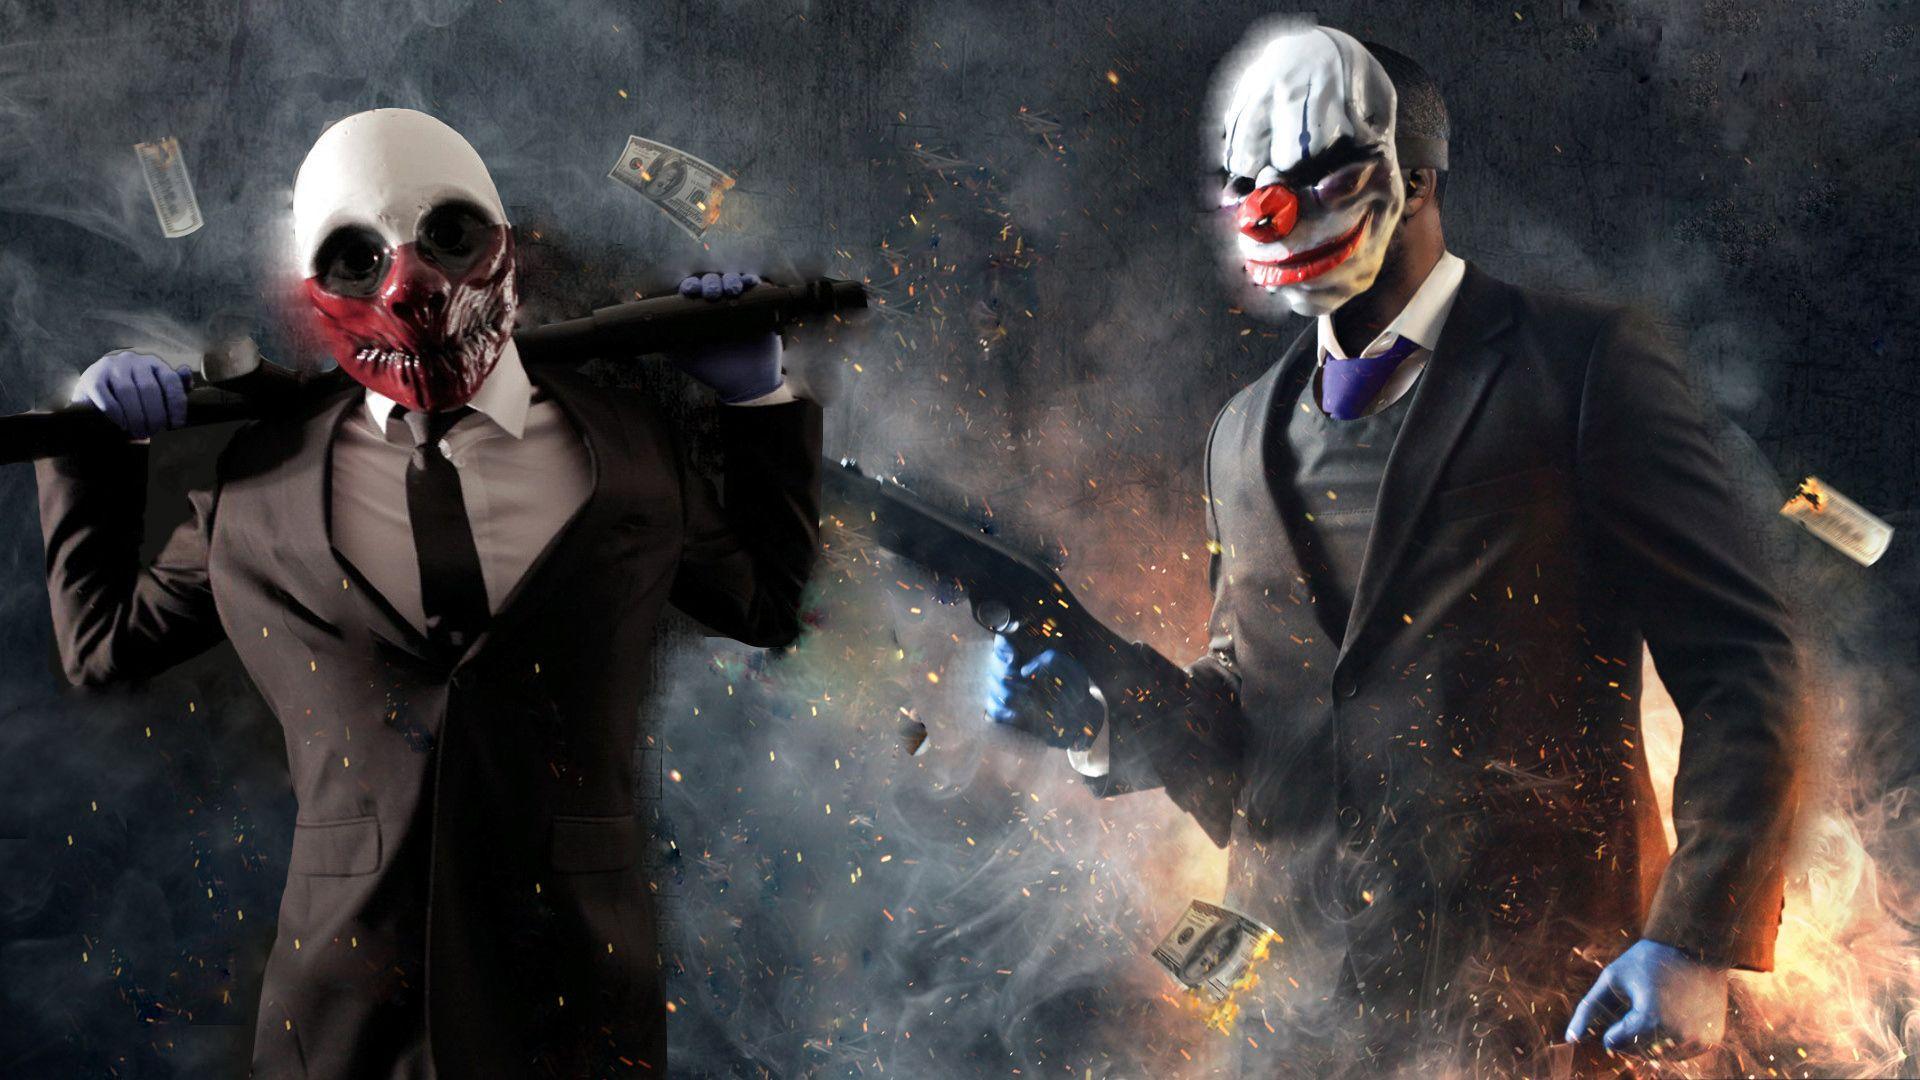 Wallpaper And Posters On PAYDAY Fans